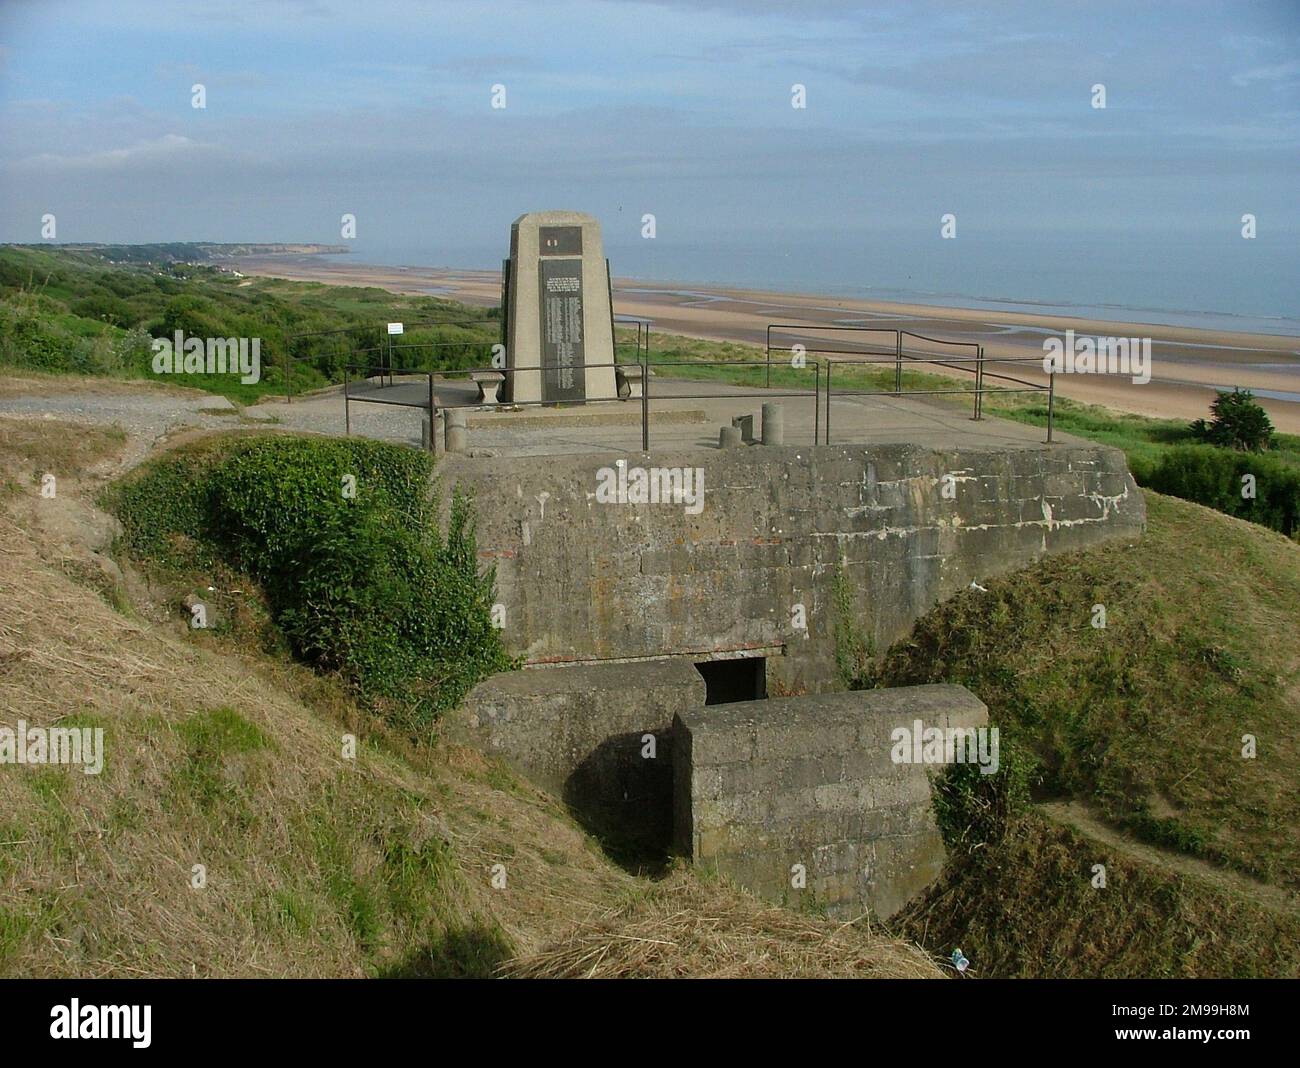 The memorial is standing on German bunker WN62 and  overlooks Omaha Beach. It has a number of memorial plaques one or more of which has been stolen. They  included 20th & 299th Engineers, 146th Engineer Combat Battalion & 6th Naval Beach Battalion. The Engineers were awarded the Croix de Guerre whose emblem is shown. Stock Photo